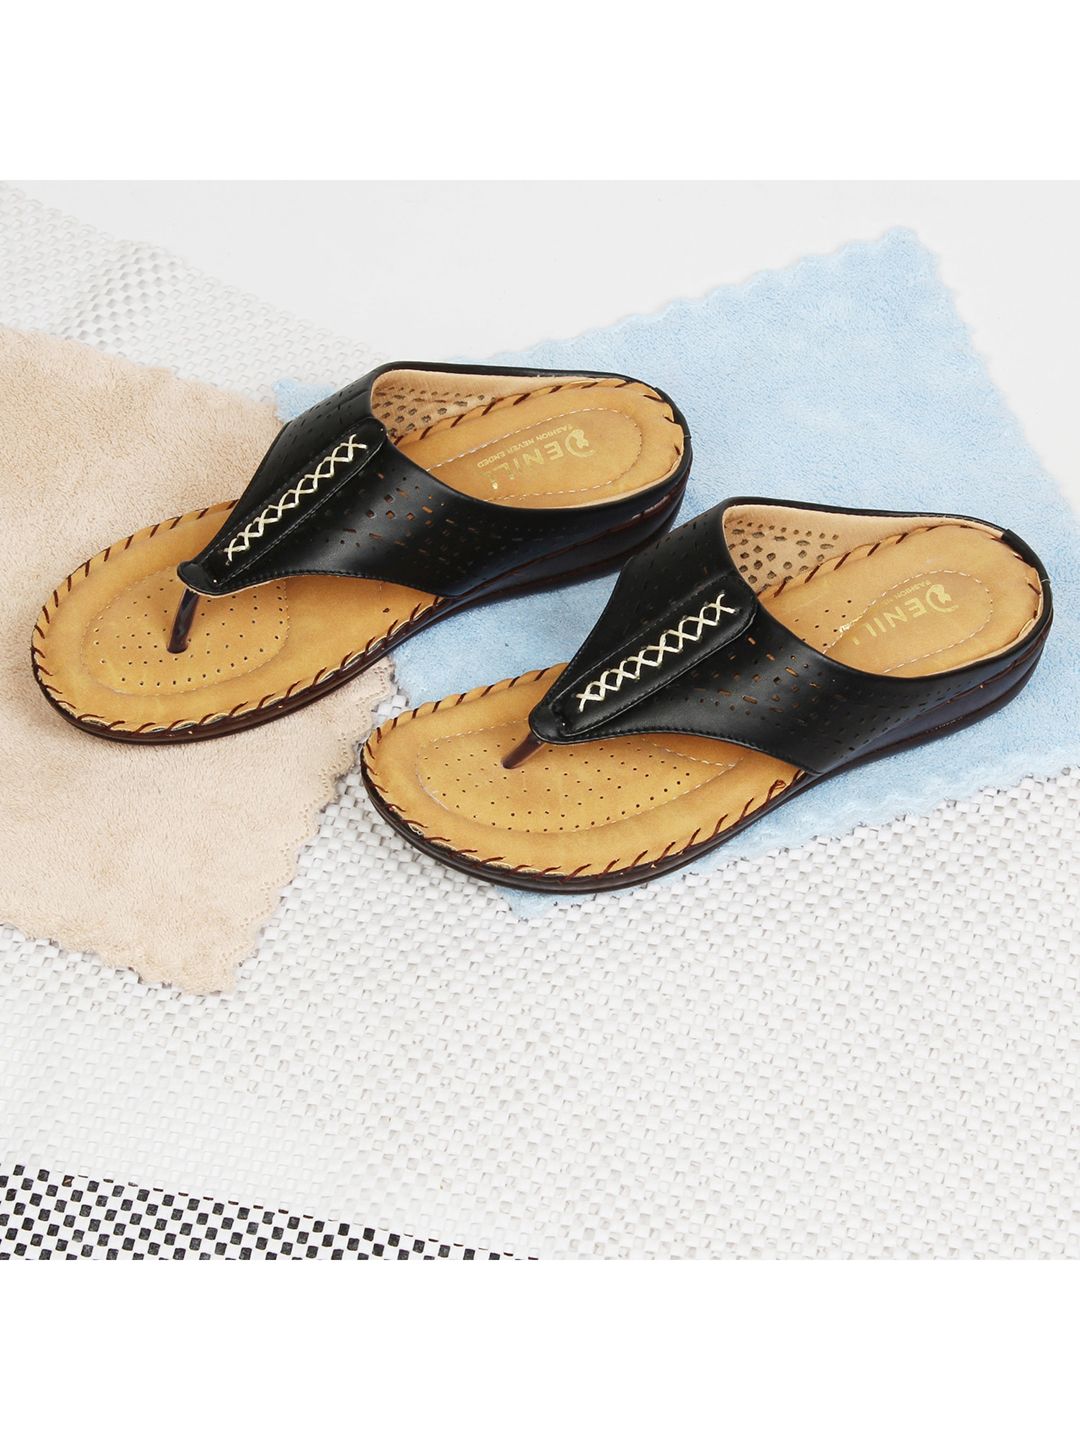 Denill Black & Brown Comfort Sandals with Laser Cuts Price in India